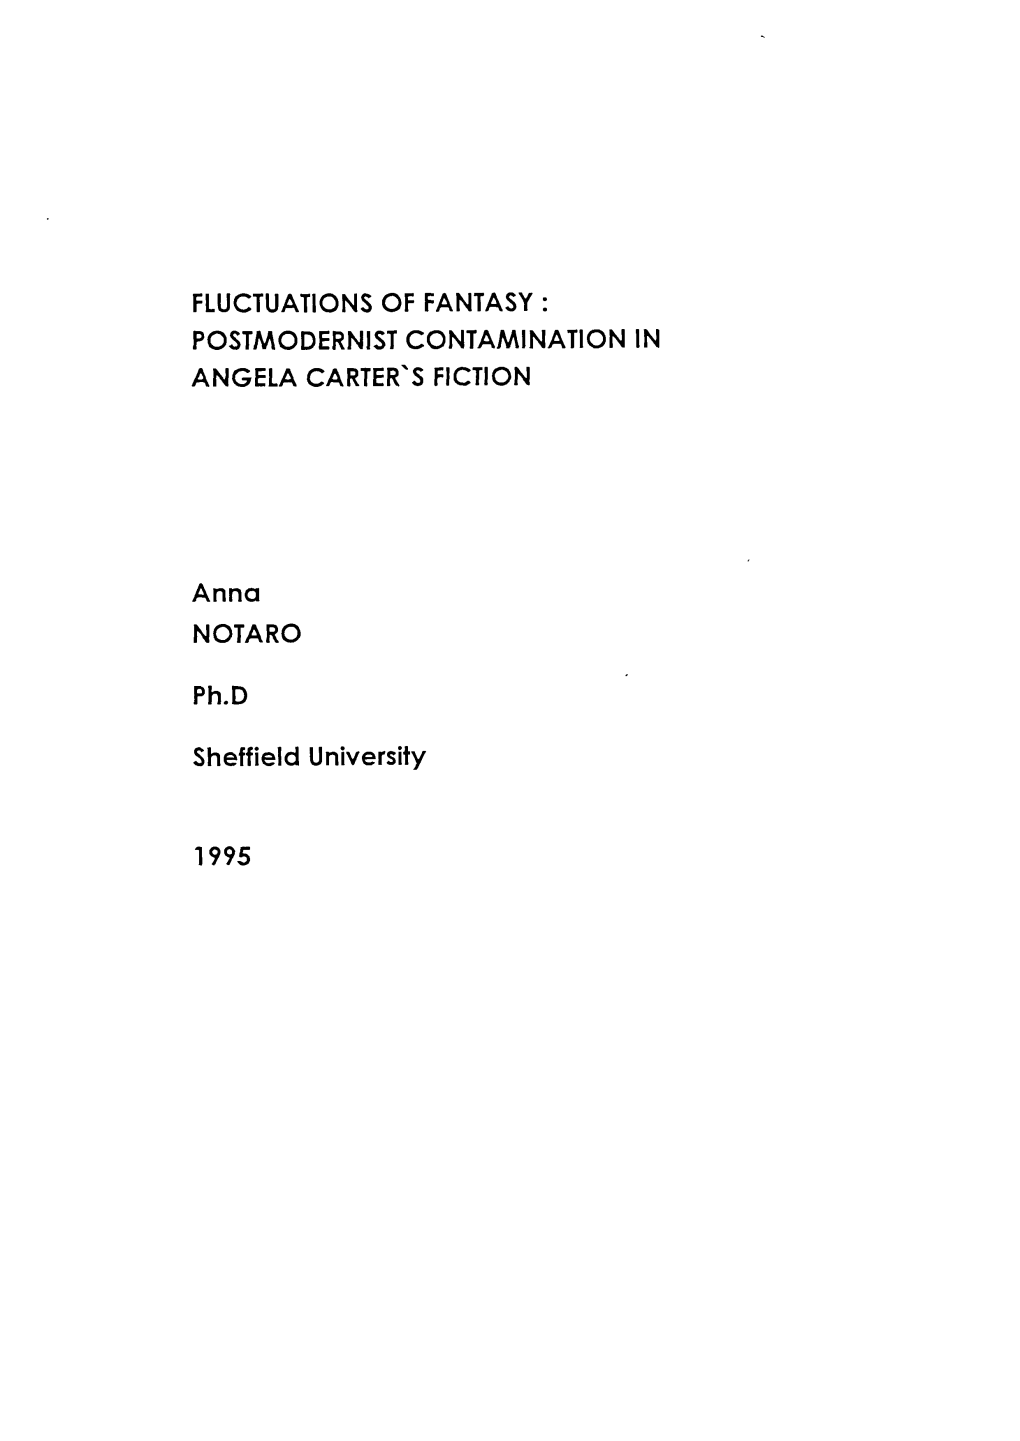 FLUCTUATIONS of FANTASY: POSTMODERNIST CONTAMINATION in ANGELA CARTER's FICTION Anna NOTARO Ph.D Sheffield University 1